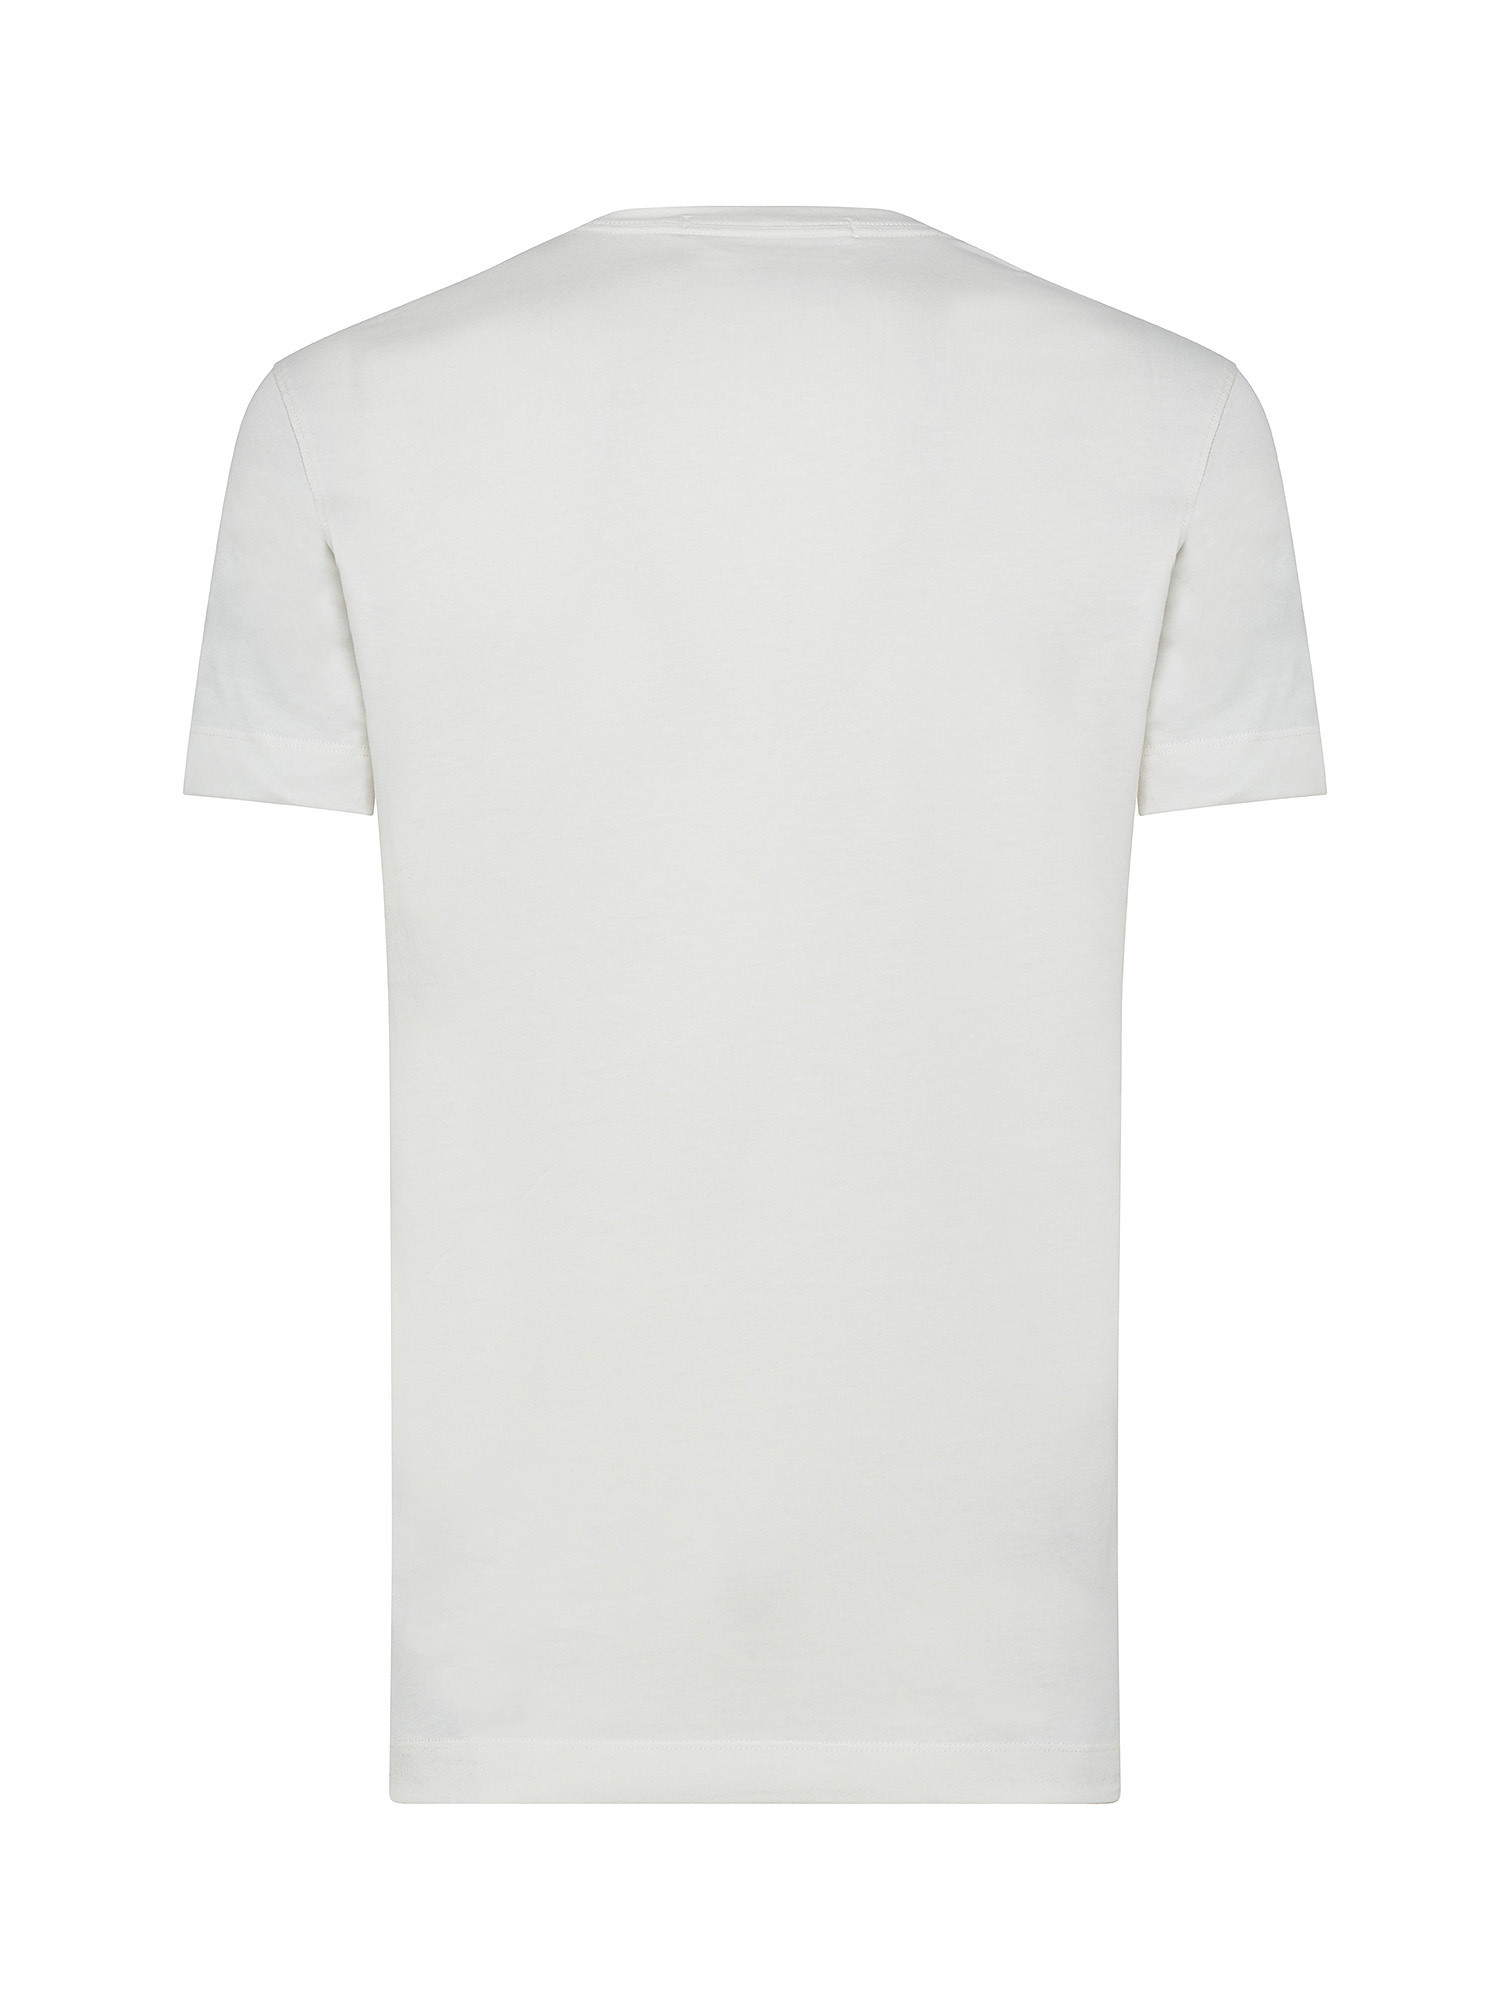 Calvin Klein Jeans - T-shirt slim fit in cotone con logo, Bianco, large image number 1